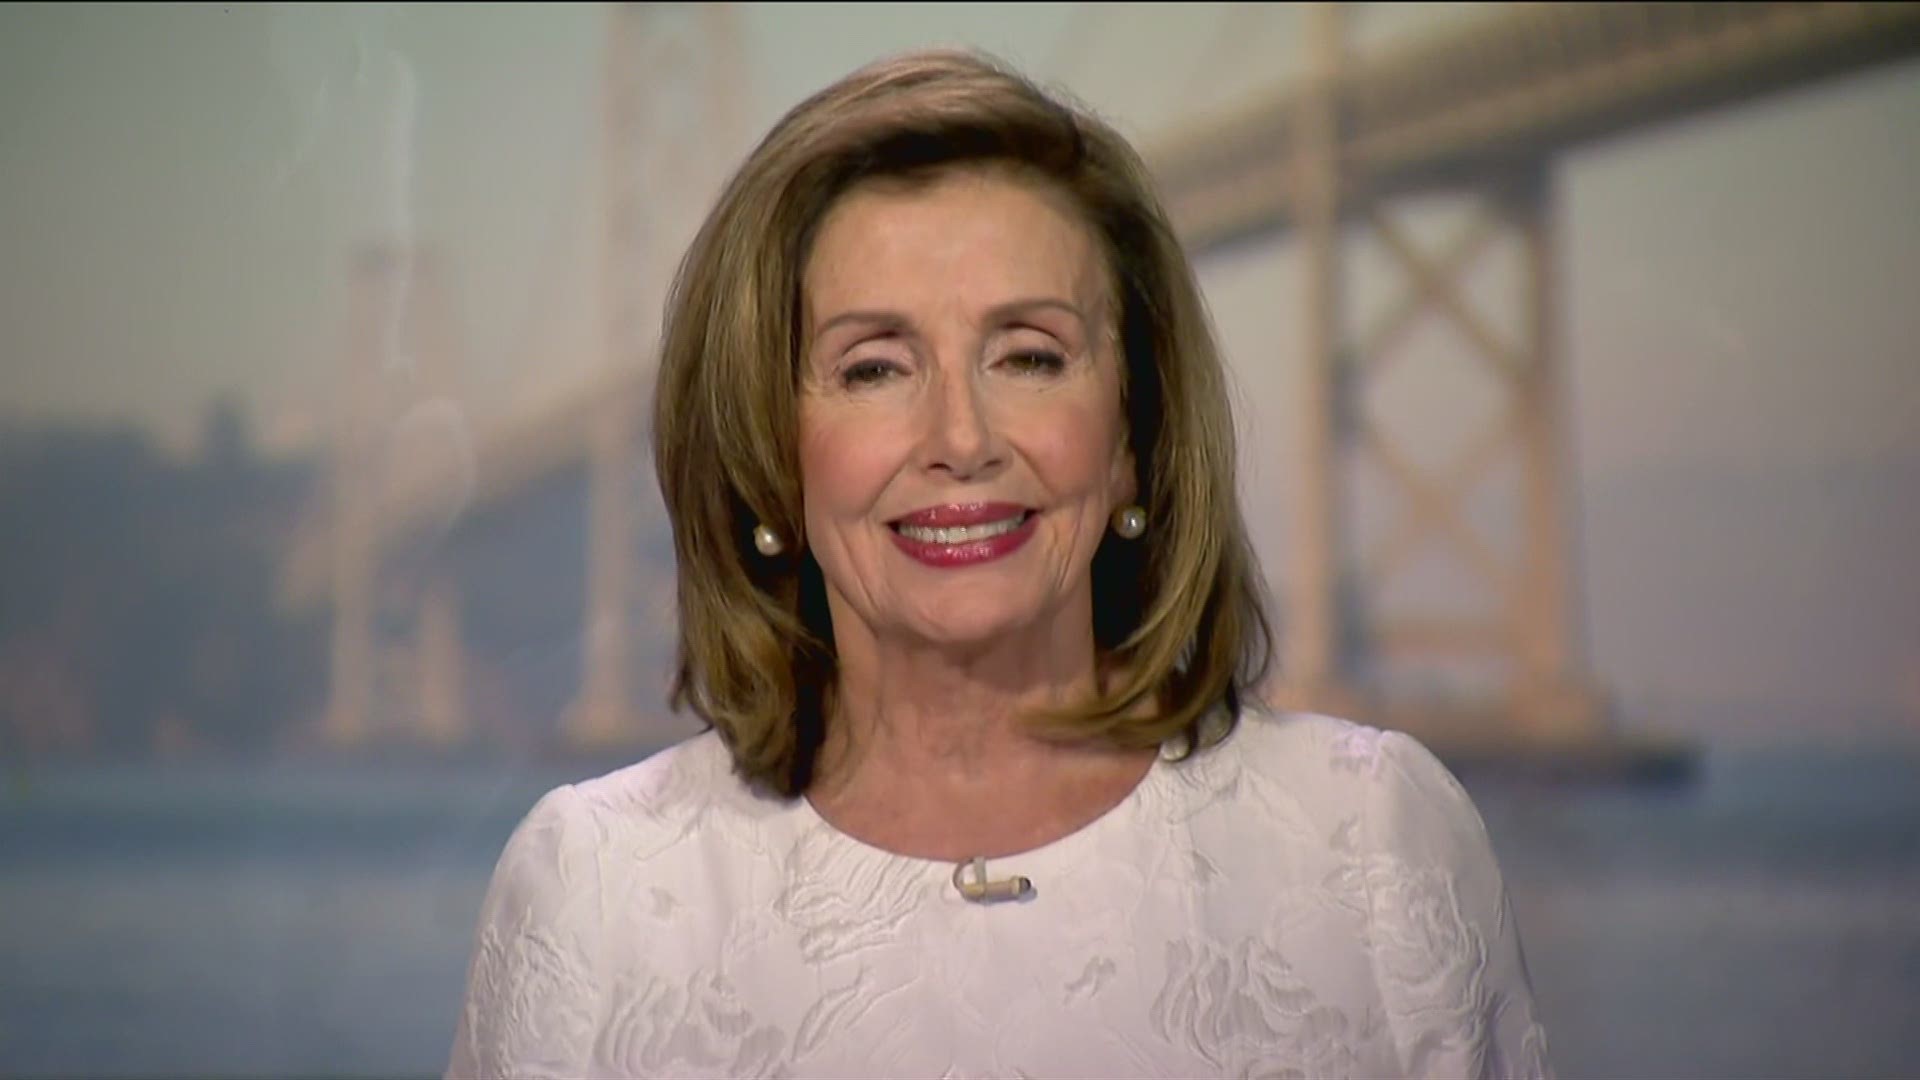 House Speaker Nancy Pelosi said on the Democratic National Convention's third night that President Trump and Sen. Mitch McConnell are 'standing in the way.'